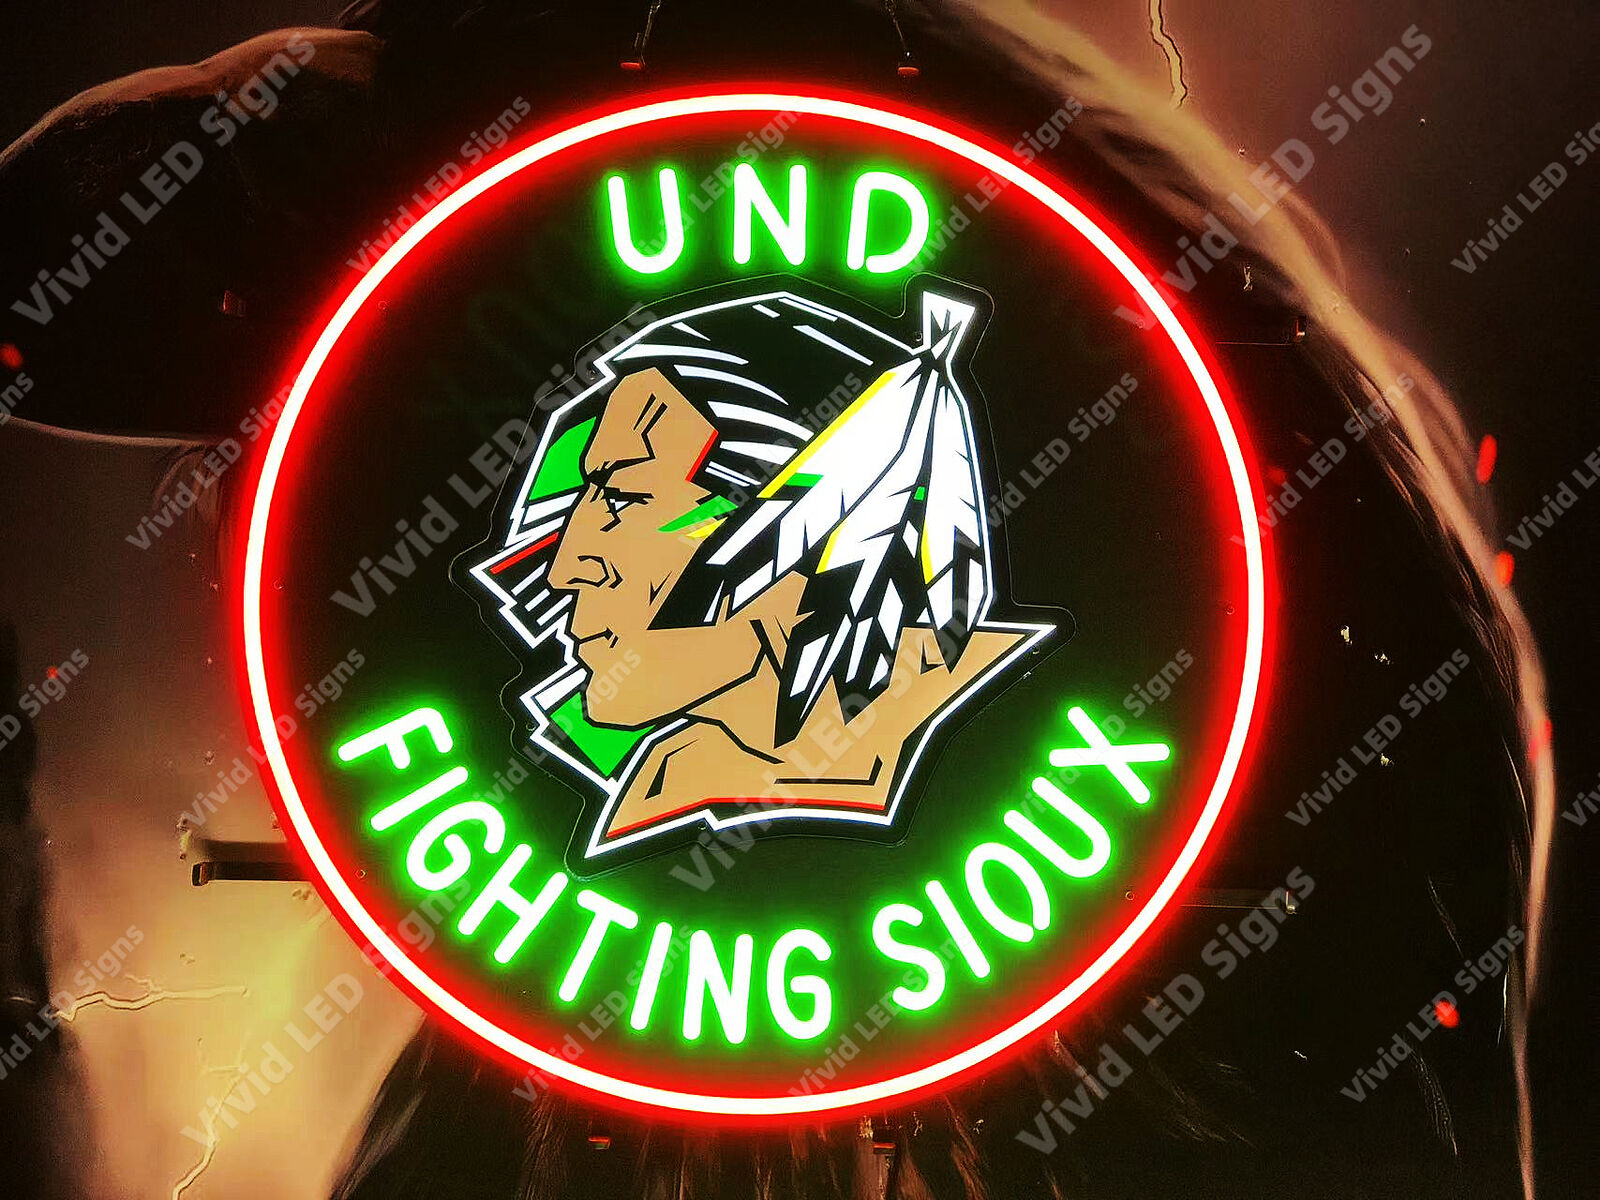 North Dakota Fighting Sioux UND Vivid LED Neon Sign Light Lamp With Dimmer